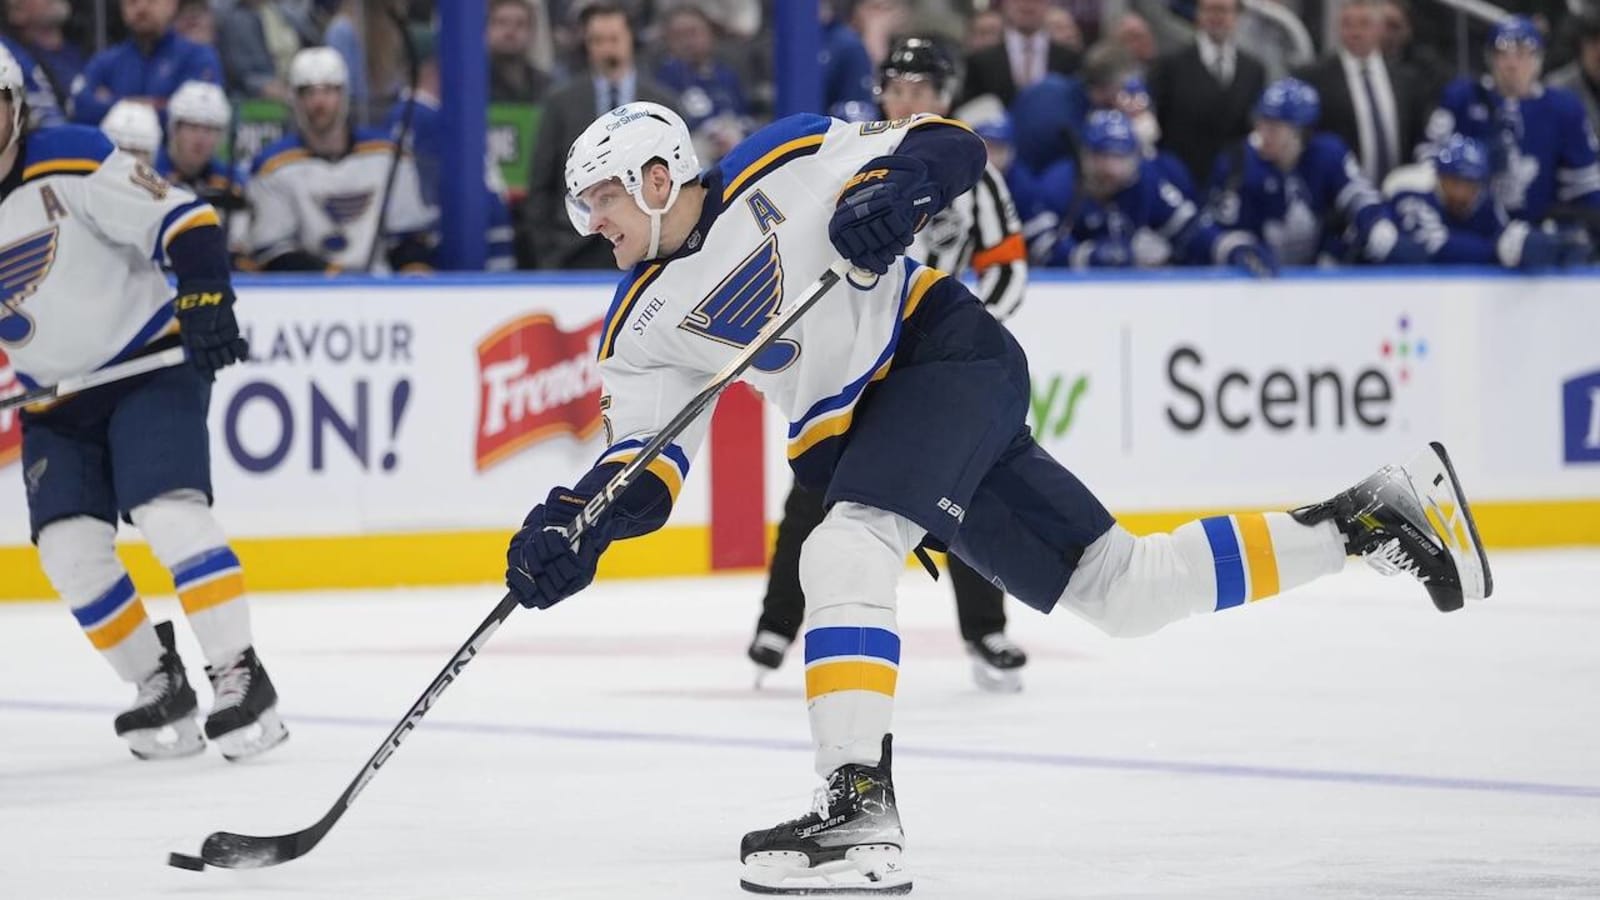 The Maple Leafs should make a play for St. Louis’ Colton Parayko